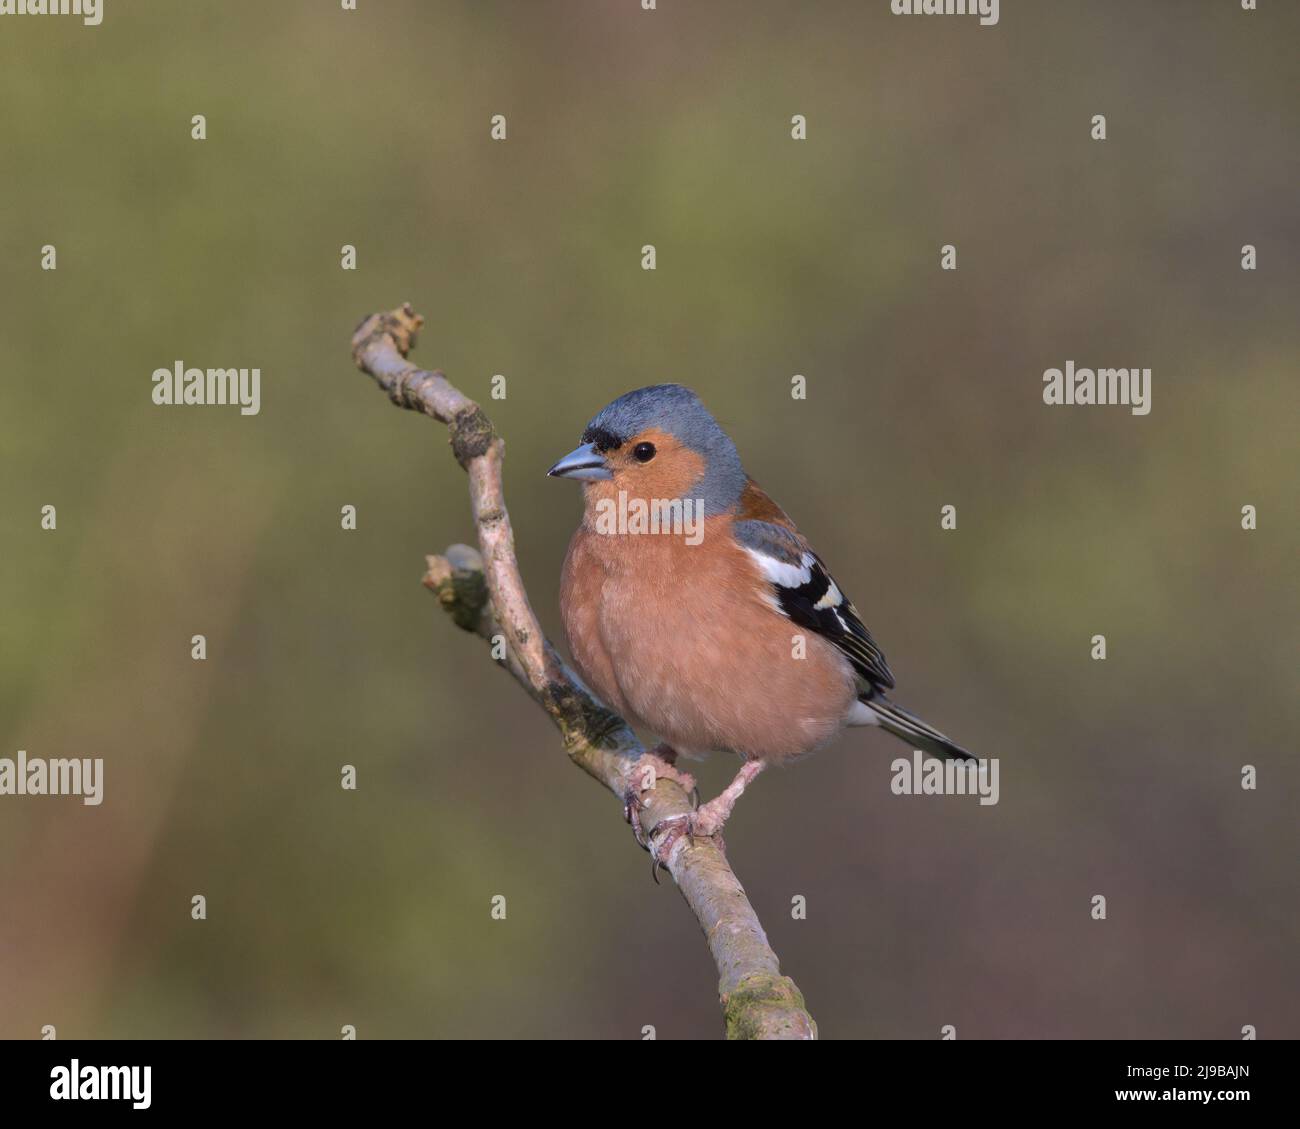 Male Chaffinch perched on a branch. Stock Photo